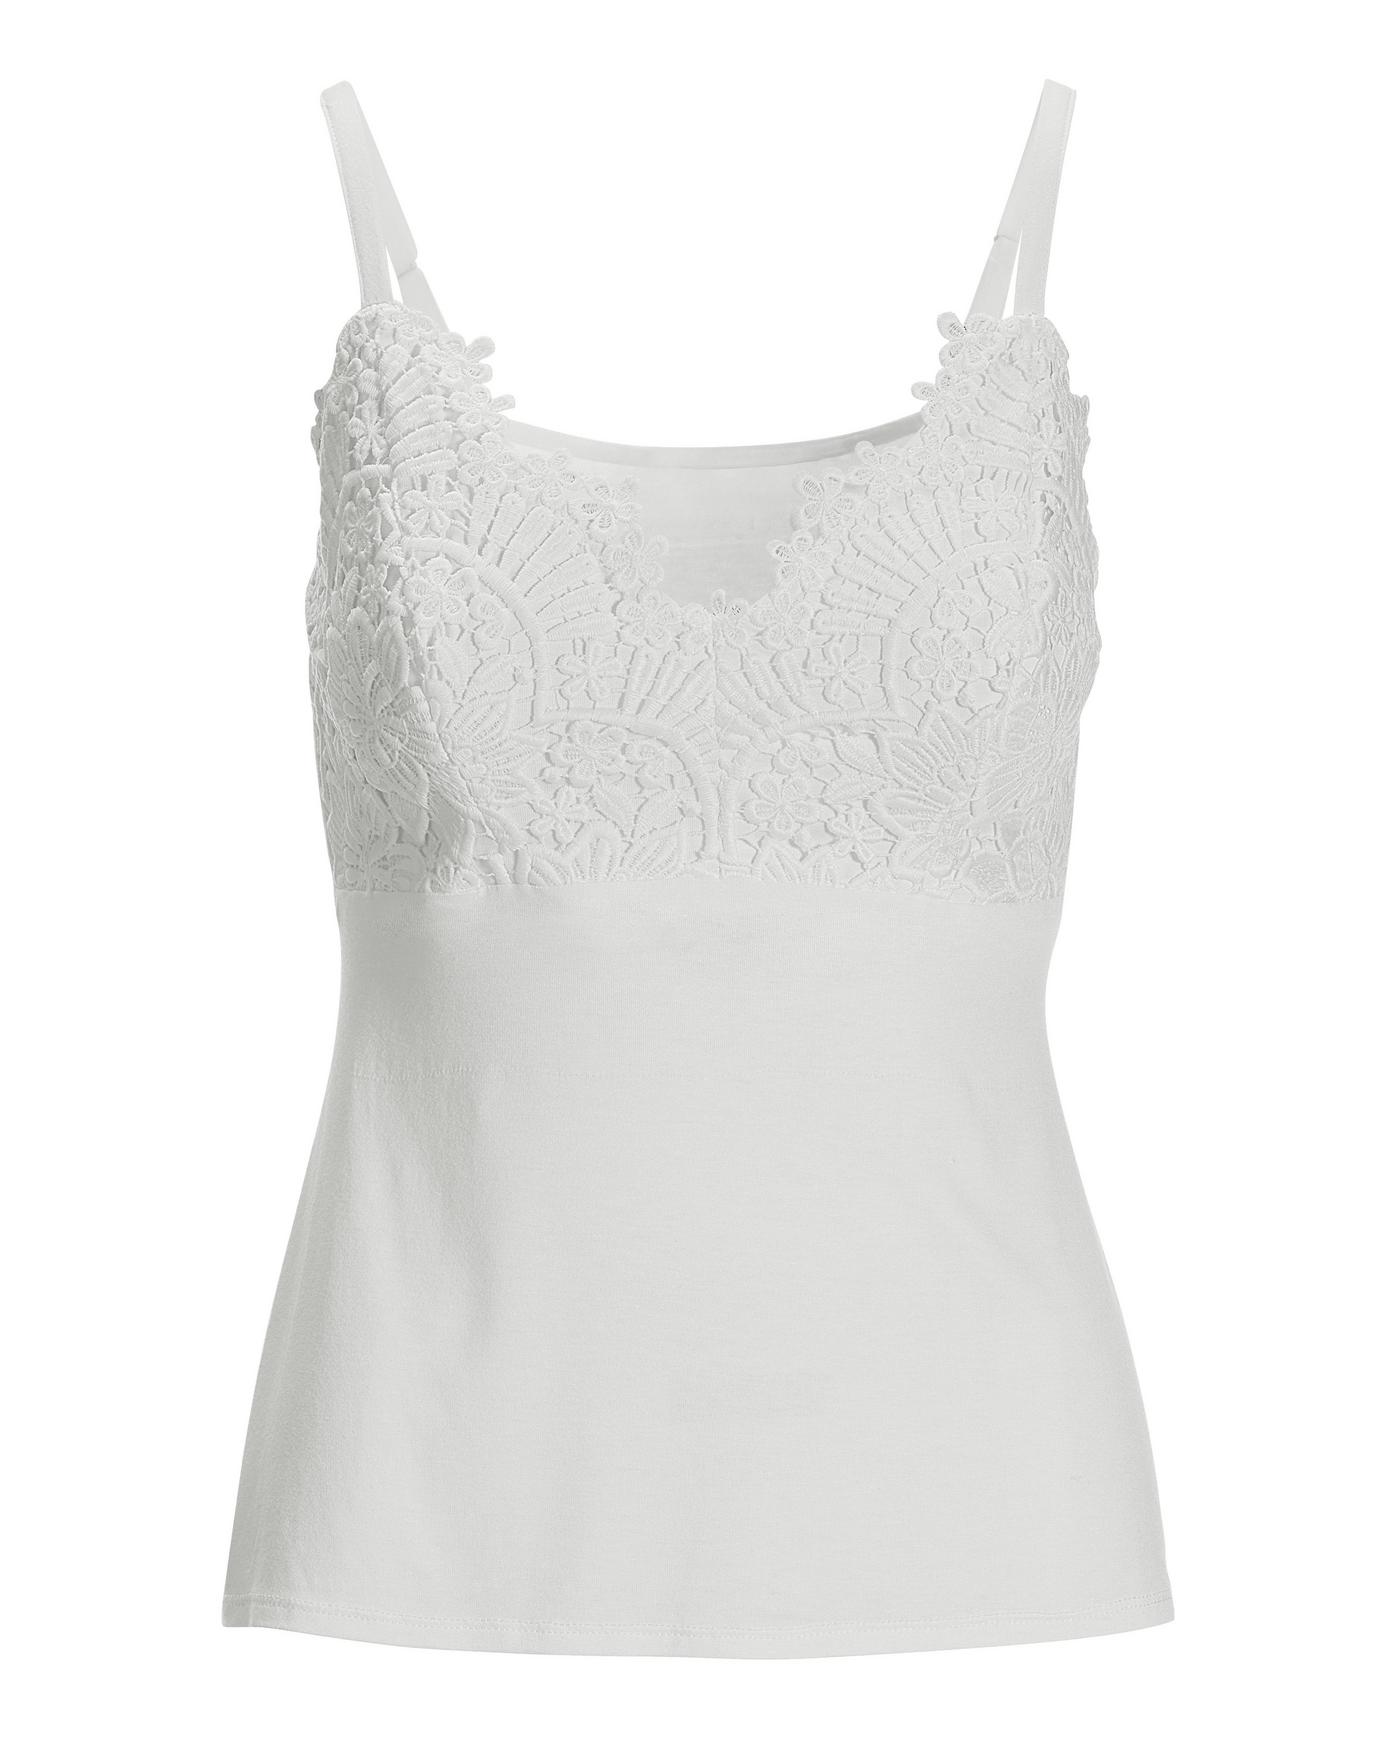 Women's Pure Style Girlfriends 1520 Lace Camiflage Cami Bra (White